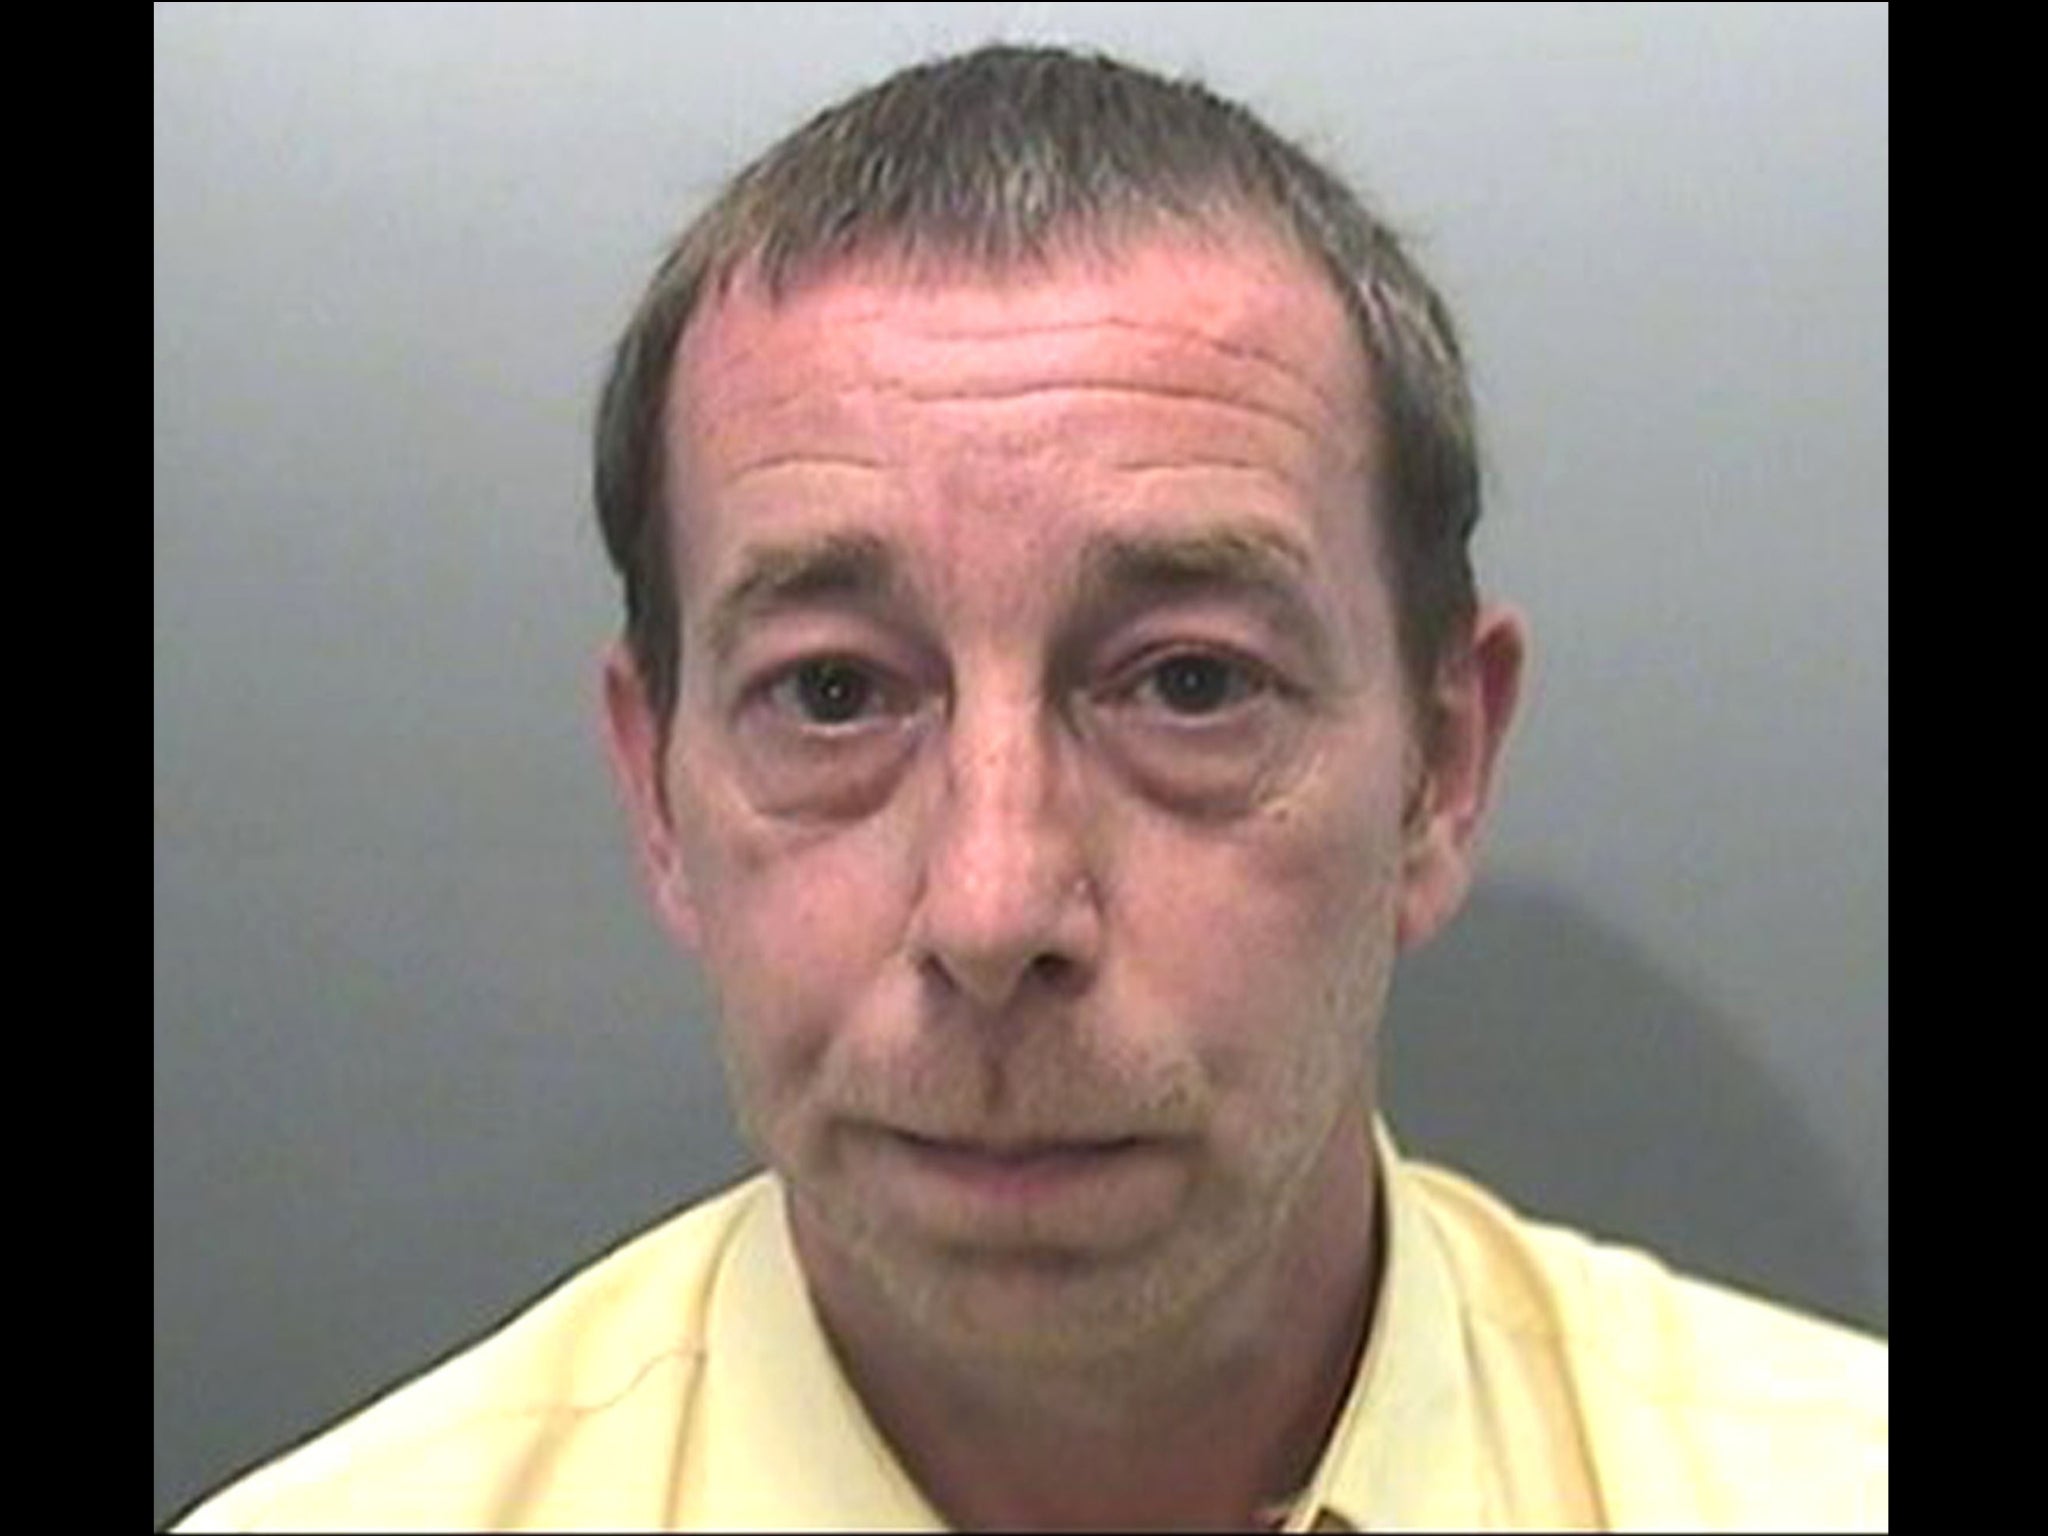 Simon Finch, 50, has been jailed for emailing details of a UK missile system to eight people